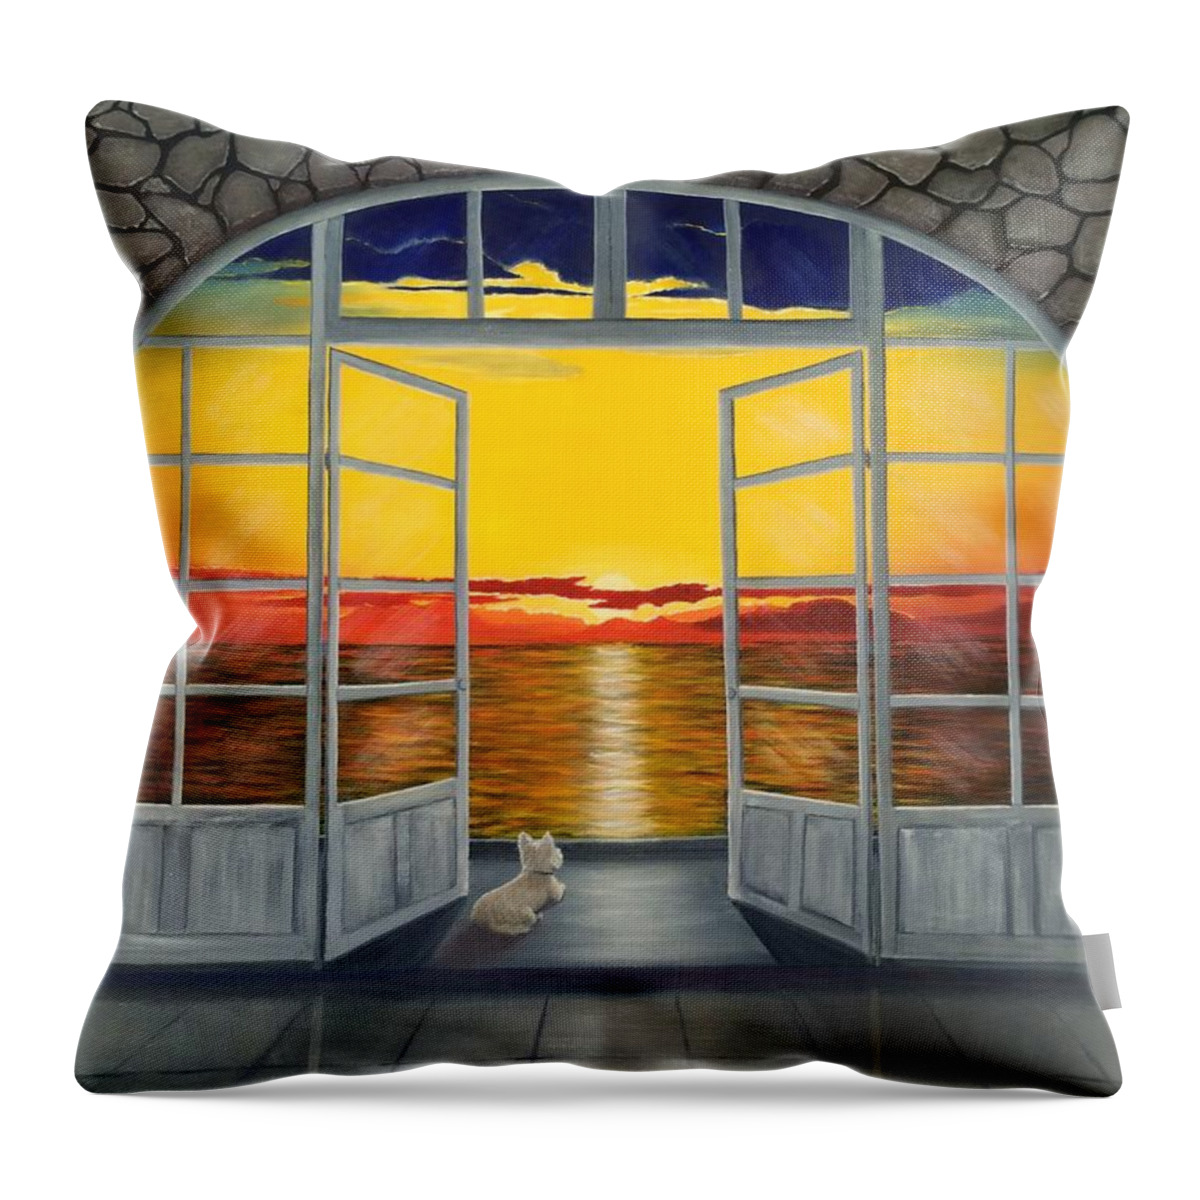 Seascape Throw Pillow featuring the painting Dog With A View by Marlene Little